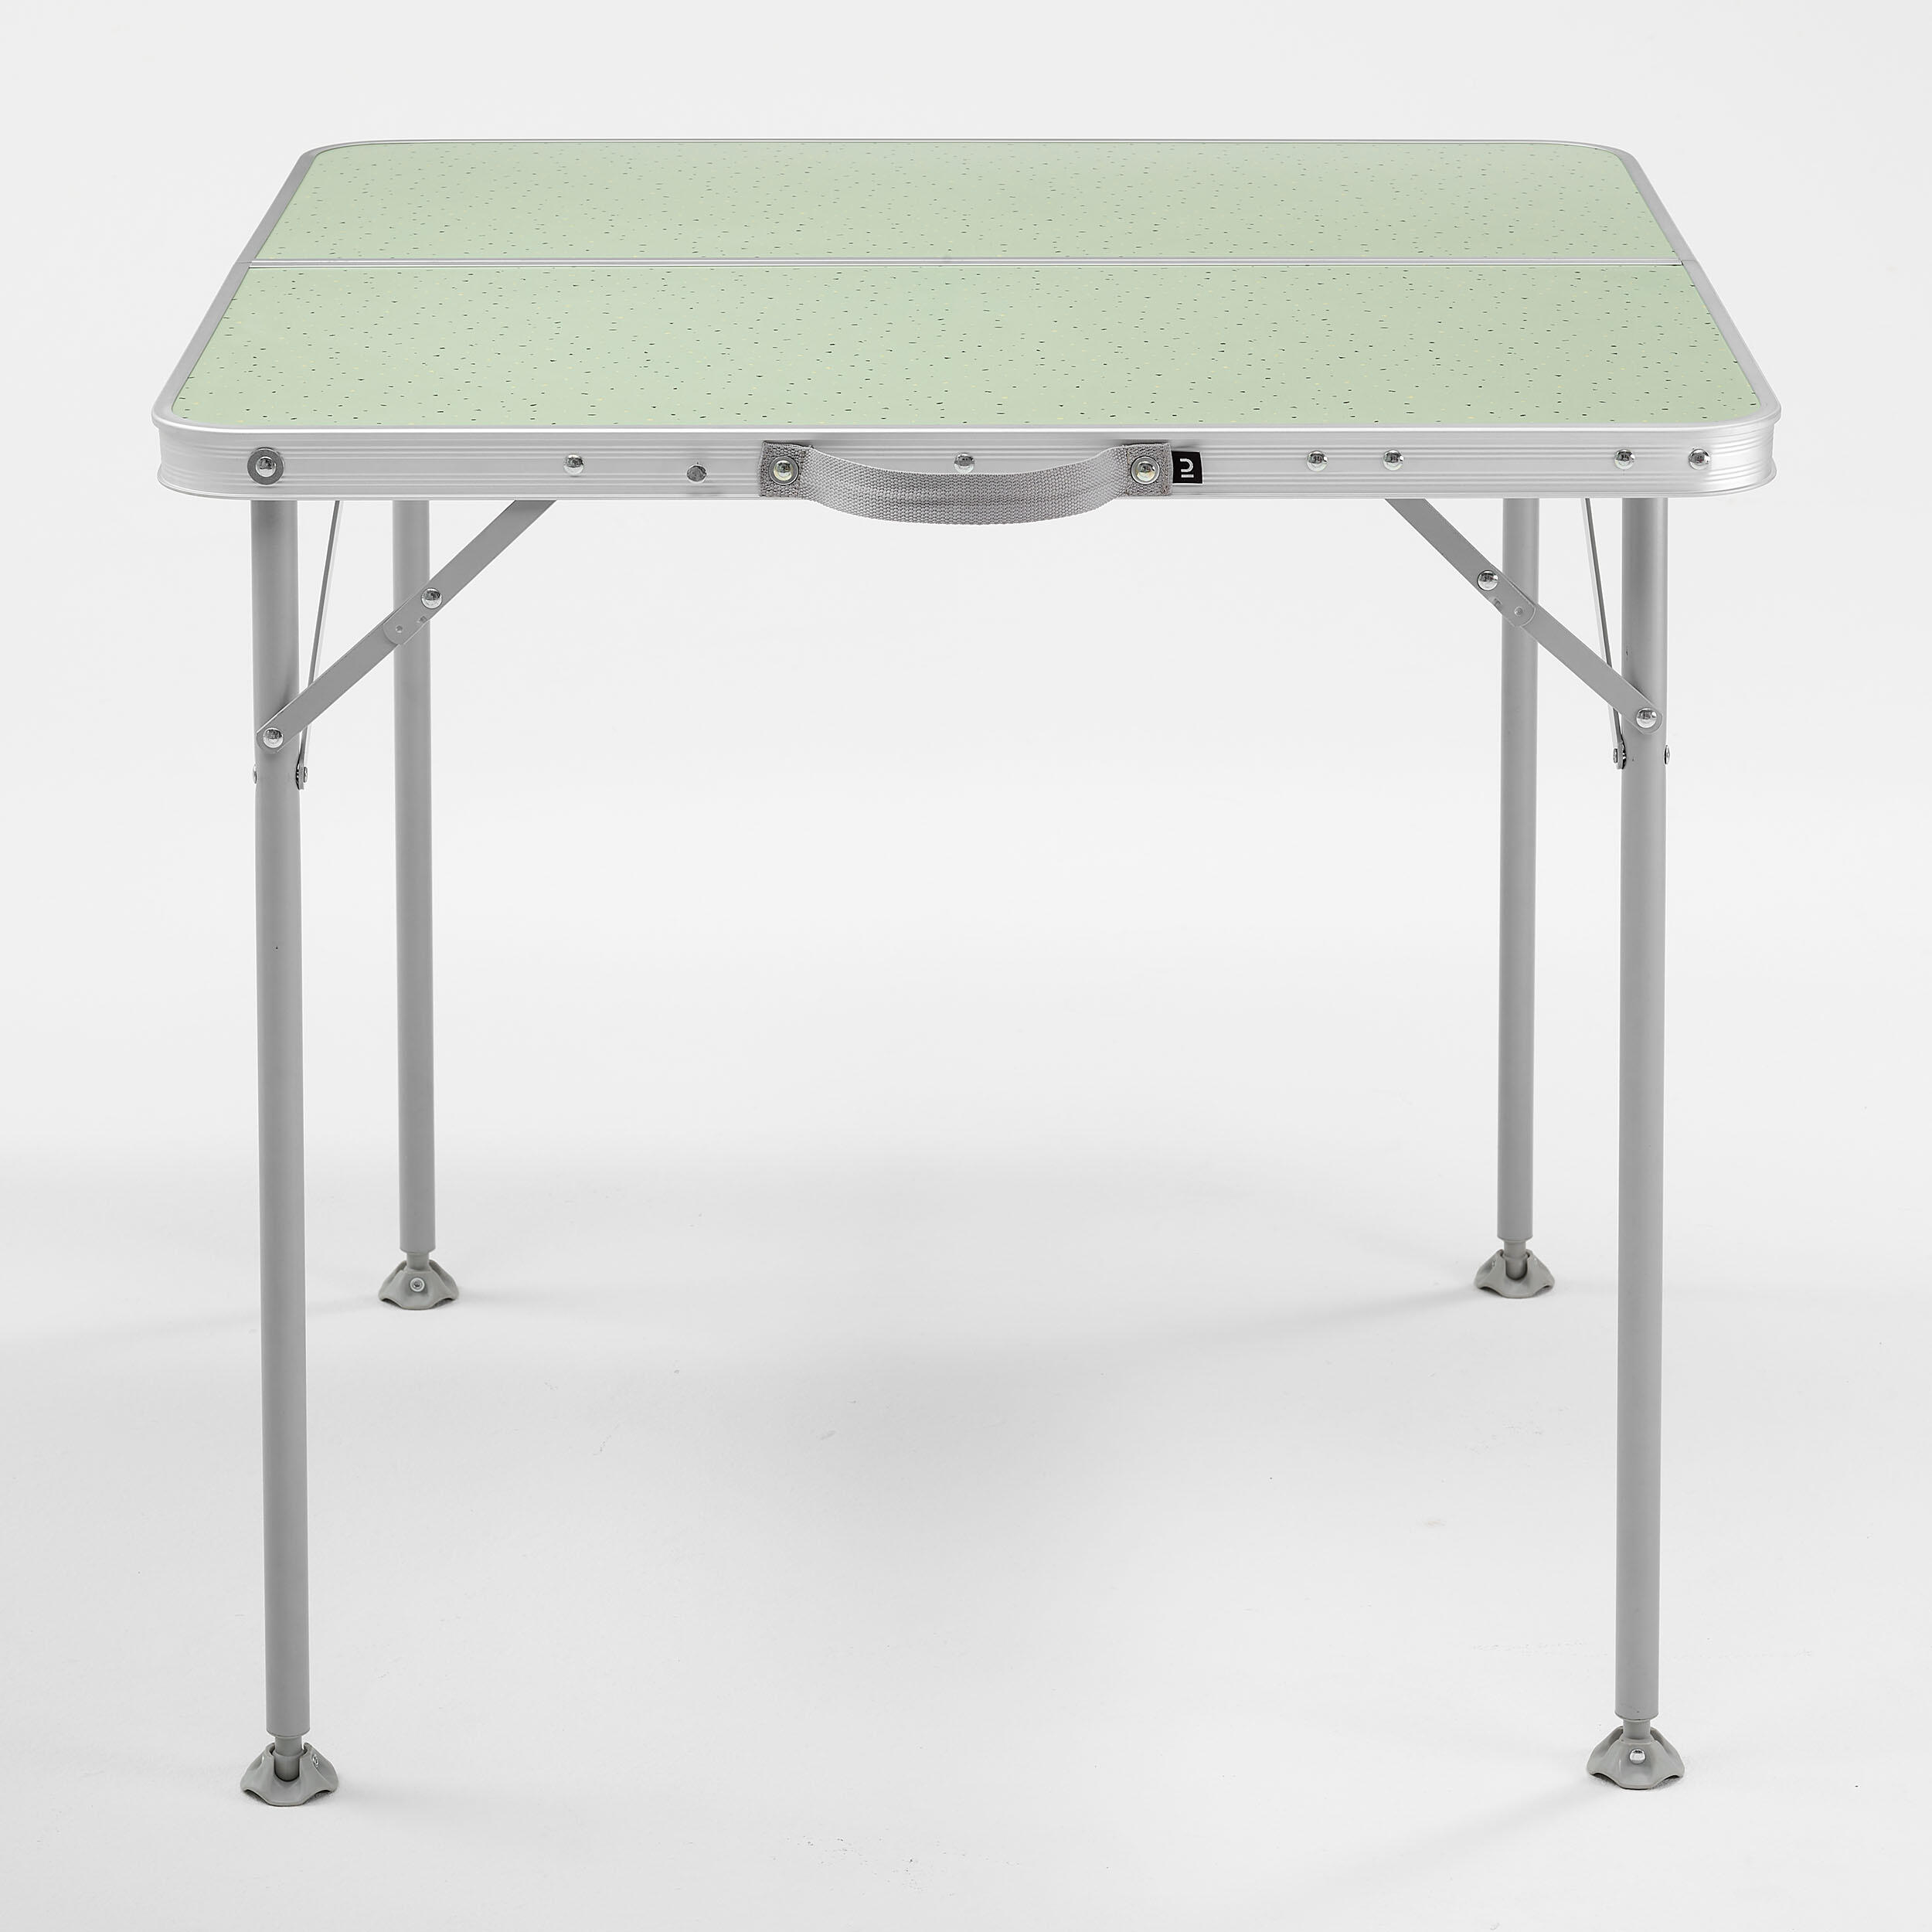 FOLDING CAMPING TABLE - 4 PEOPLE 6/11